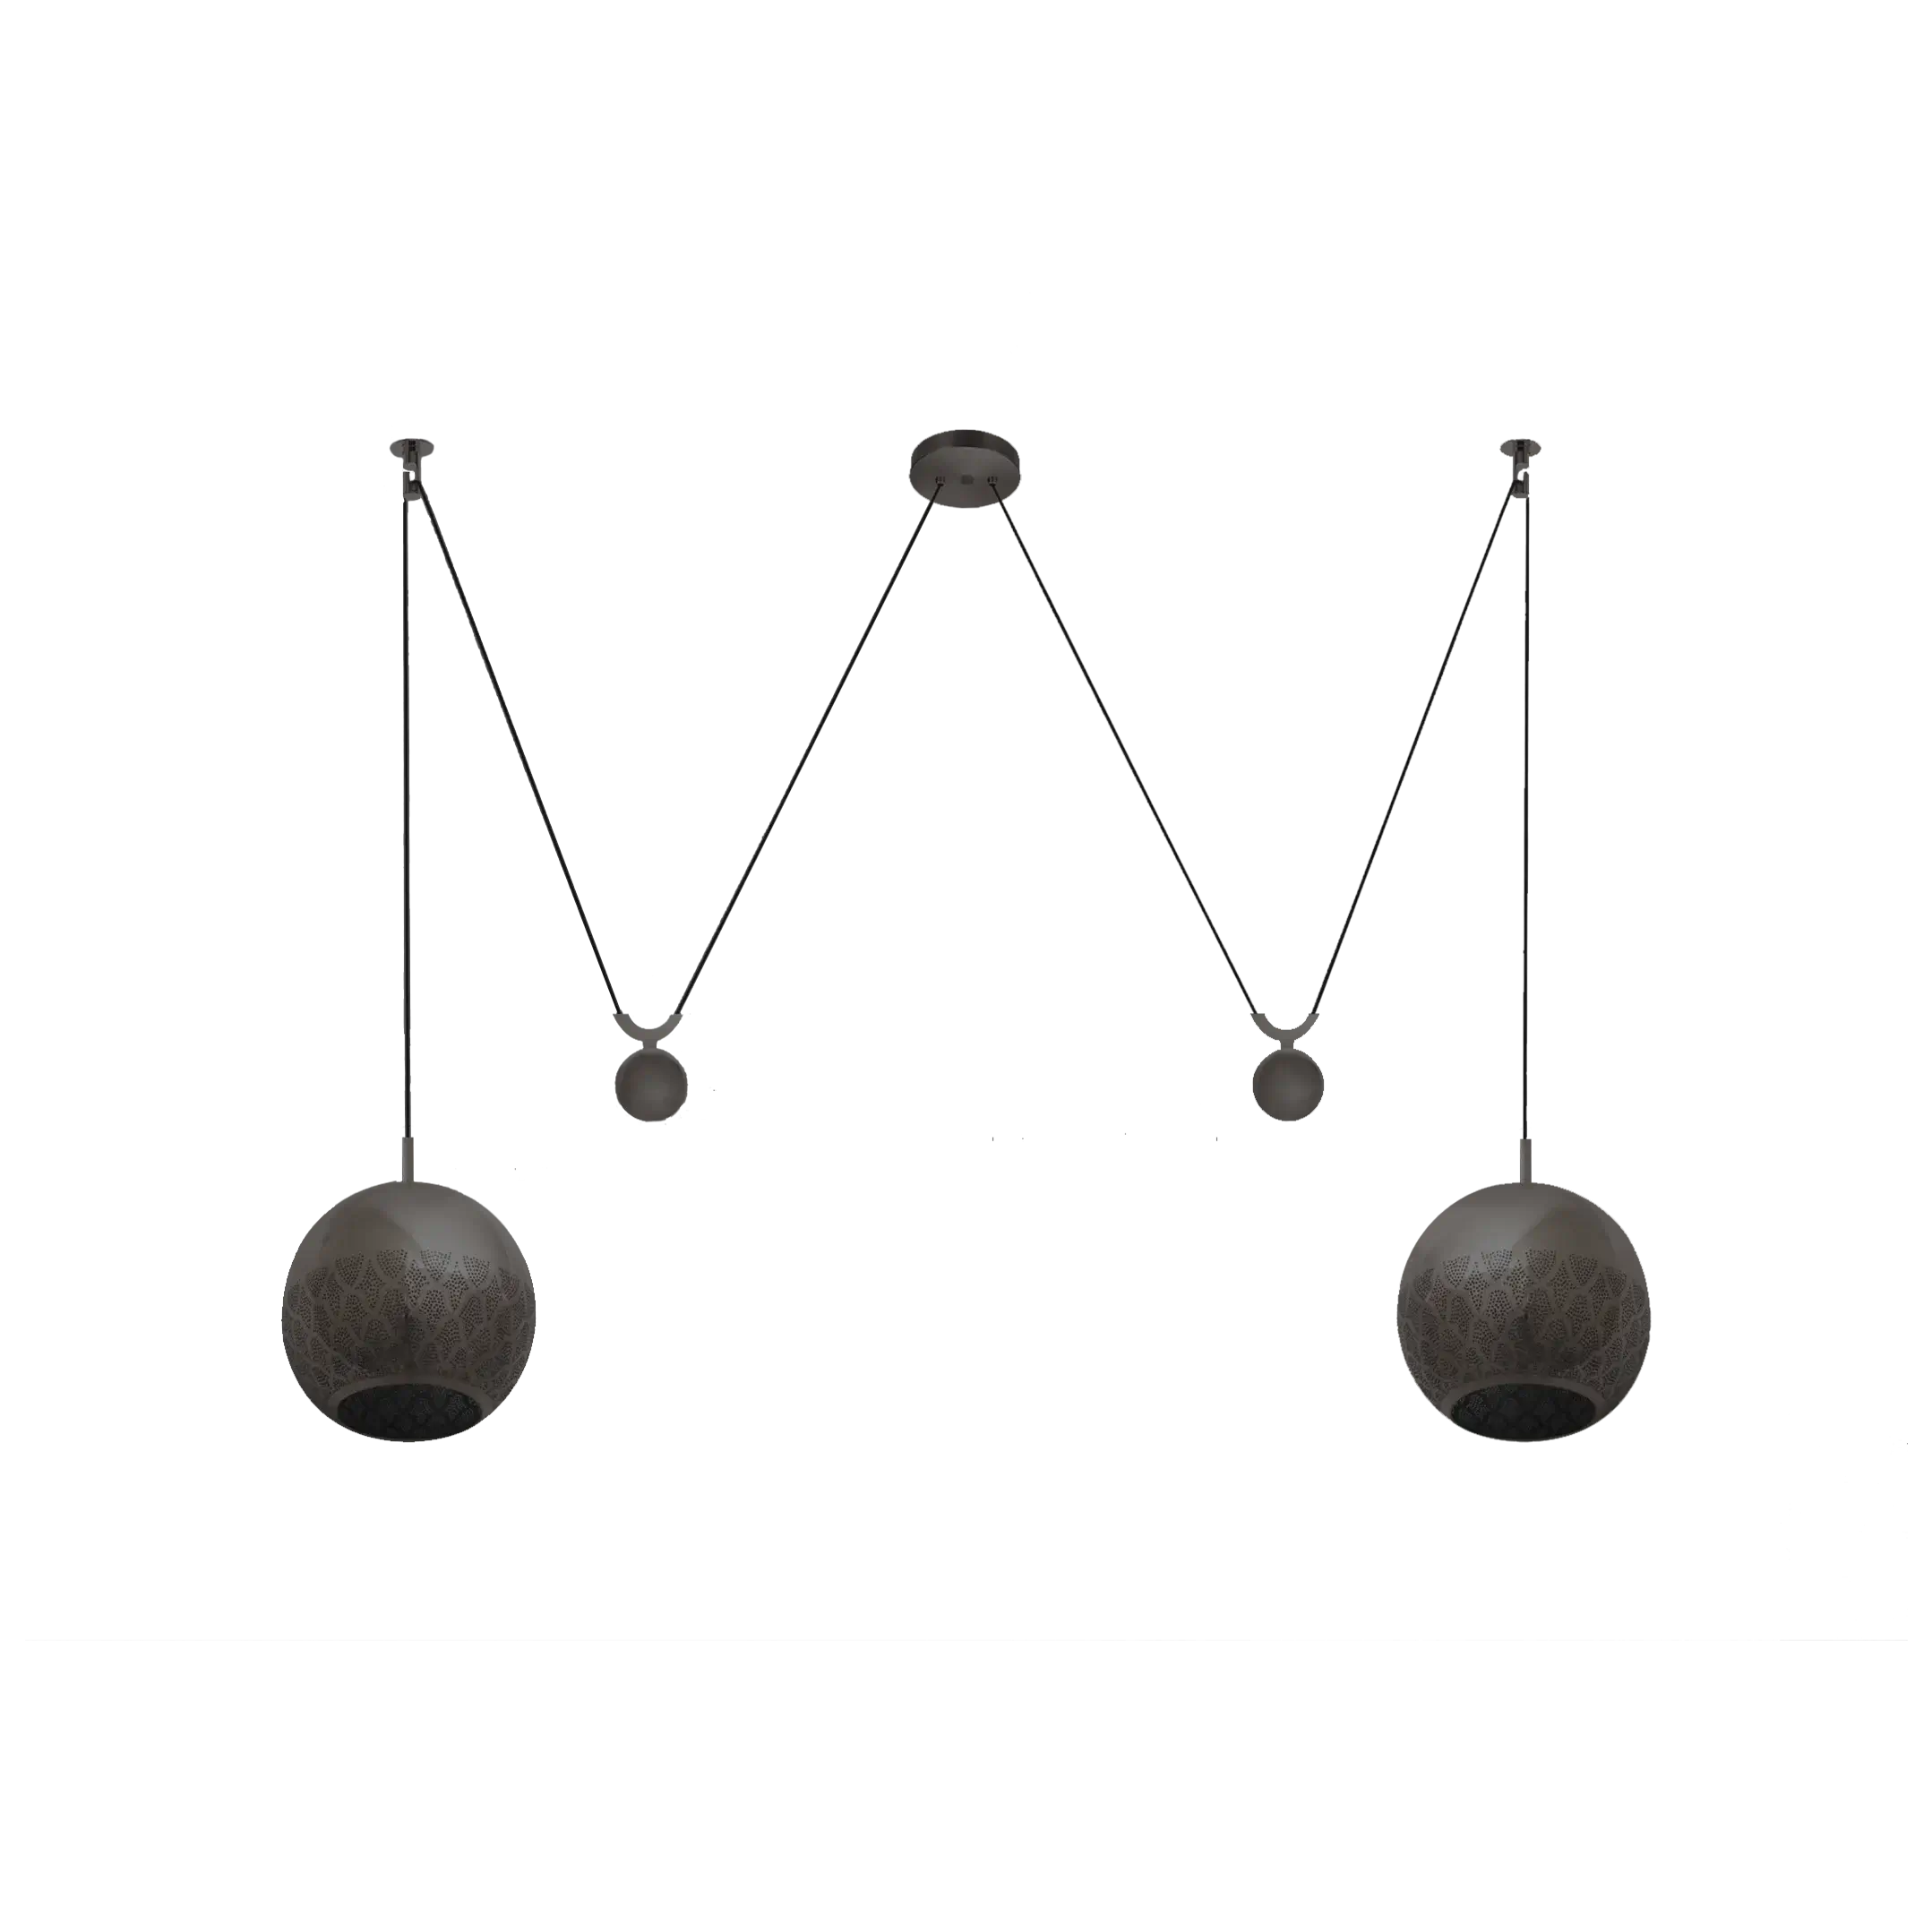 Dounia home Pendant light in black   made of Metal, Model: Nur reversed DOUBLE CONTERBALANCE